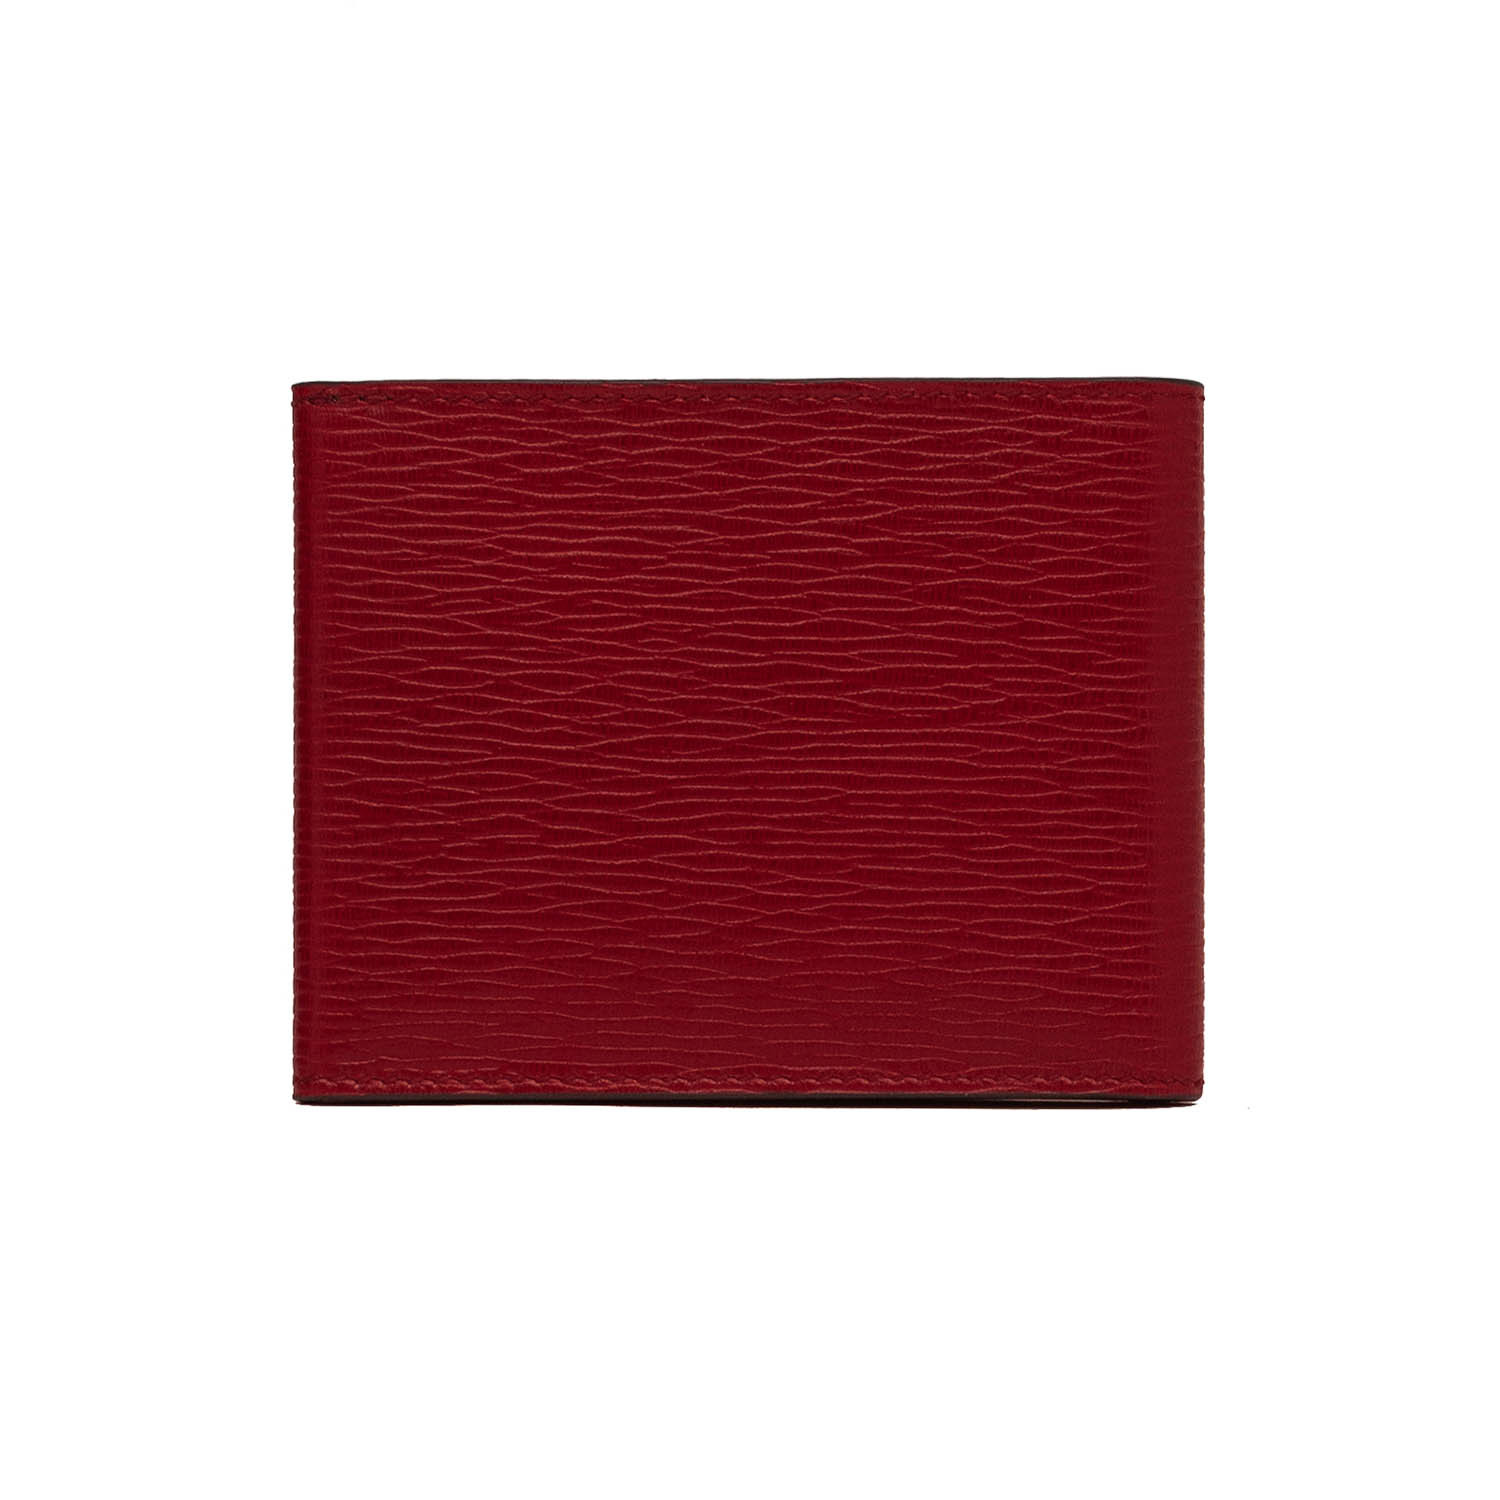 Salvatore Ferragamo // Men's Hammered Leather Trifold Wallet Faded ...